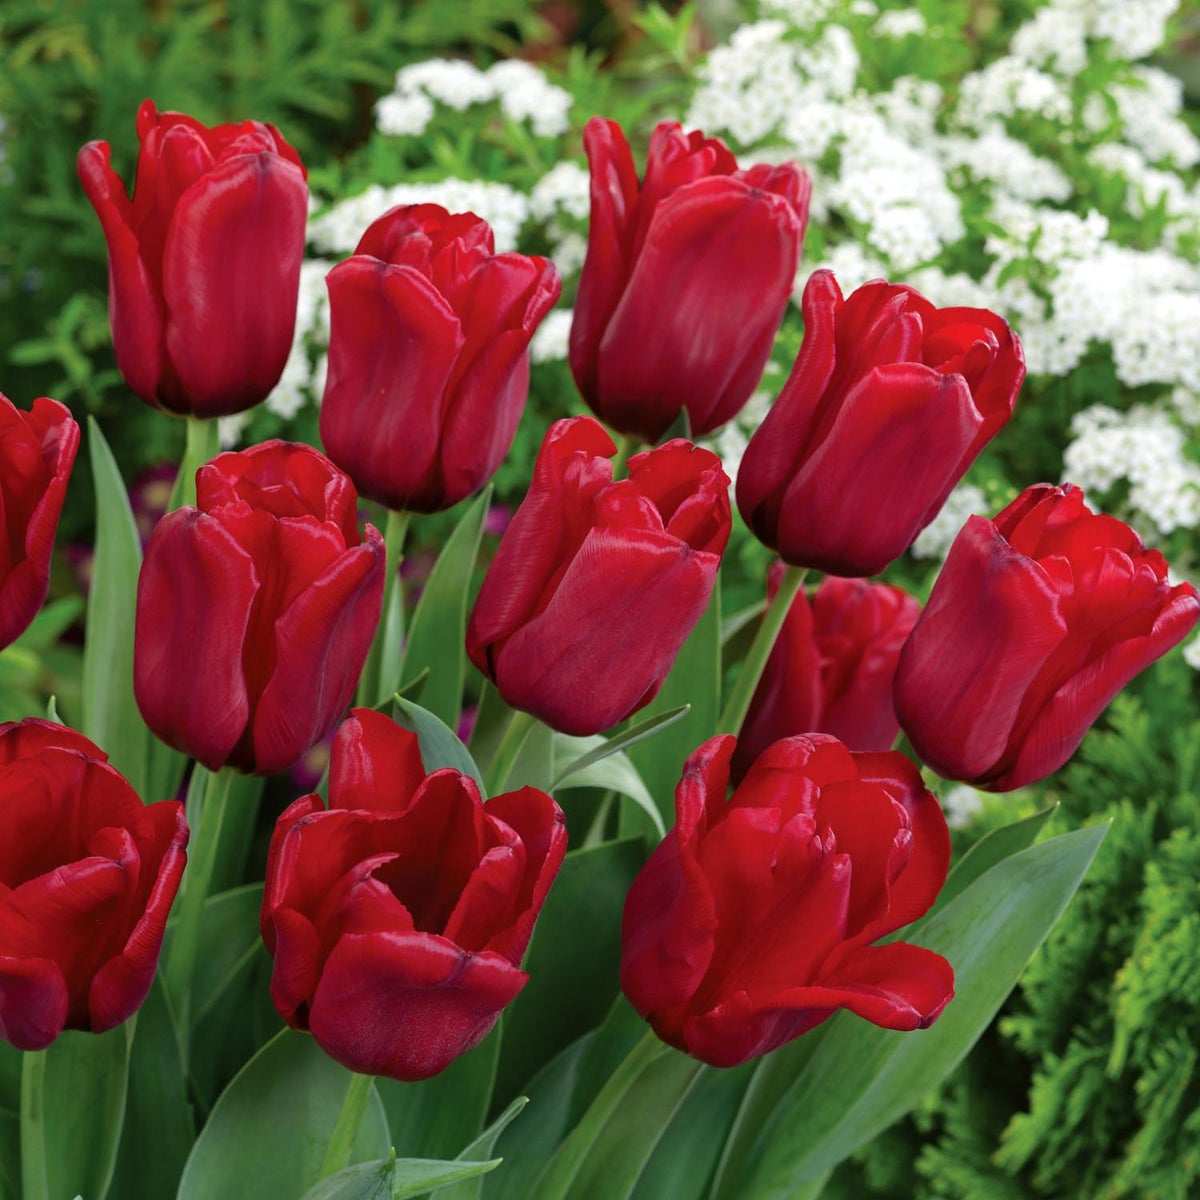 The Top 5 Most Sold Tulips Seadov